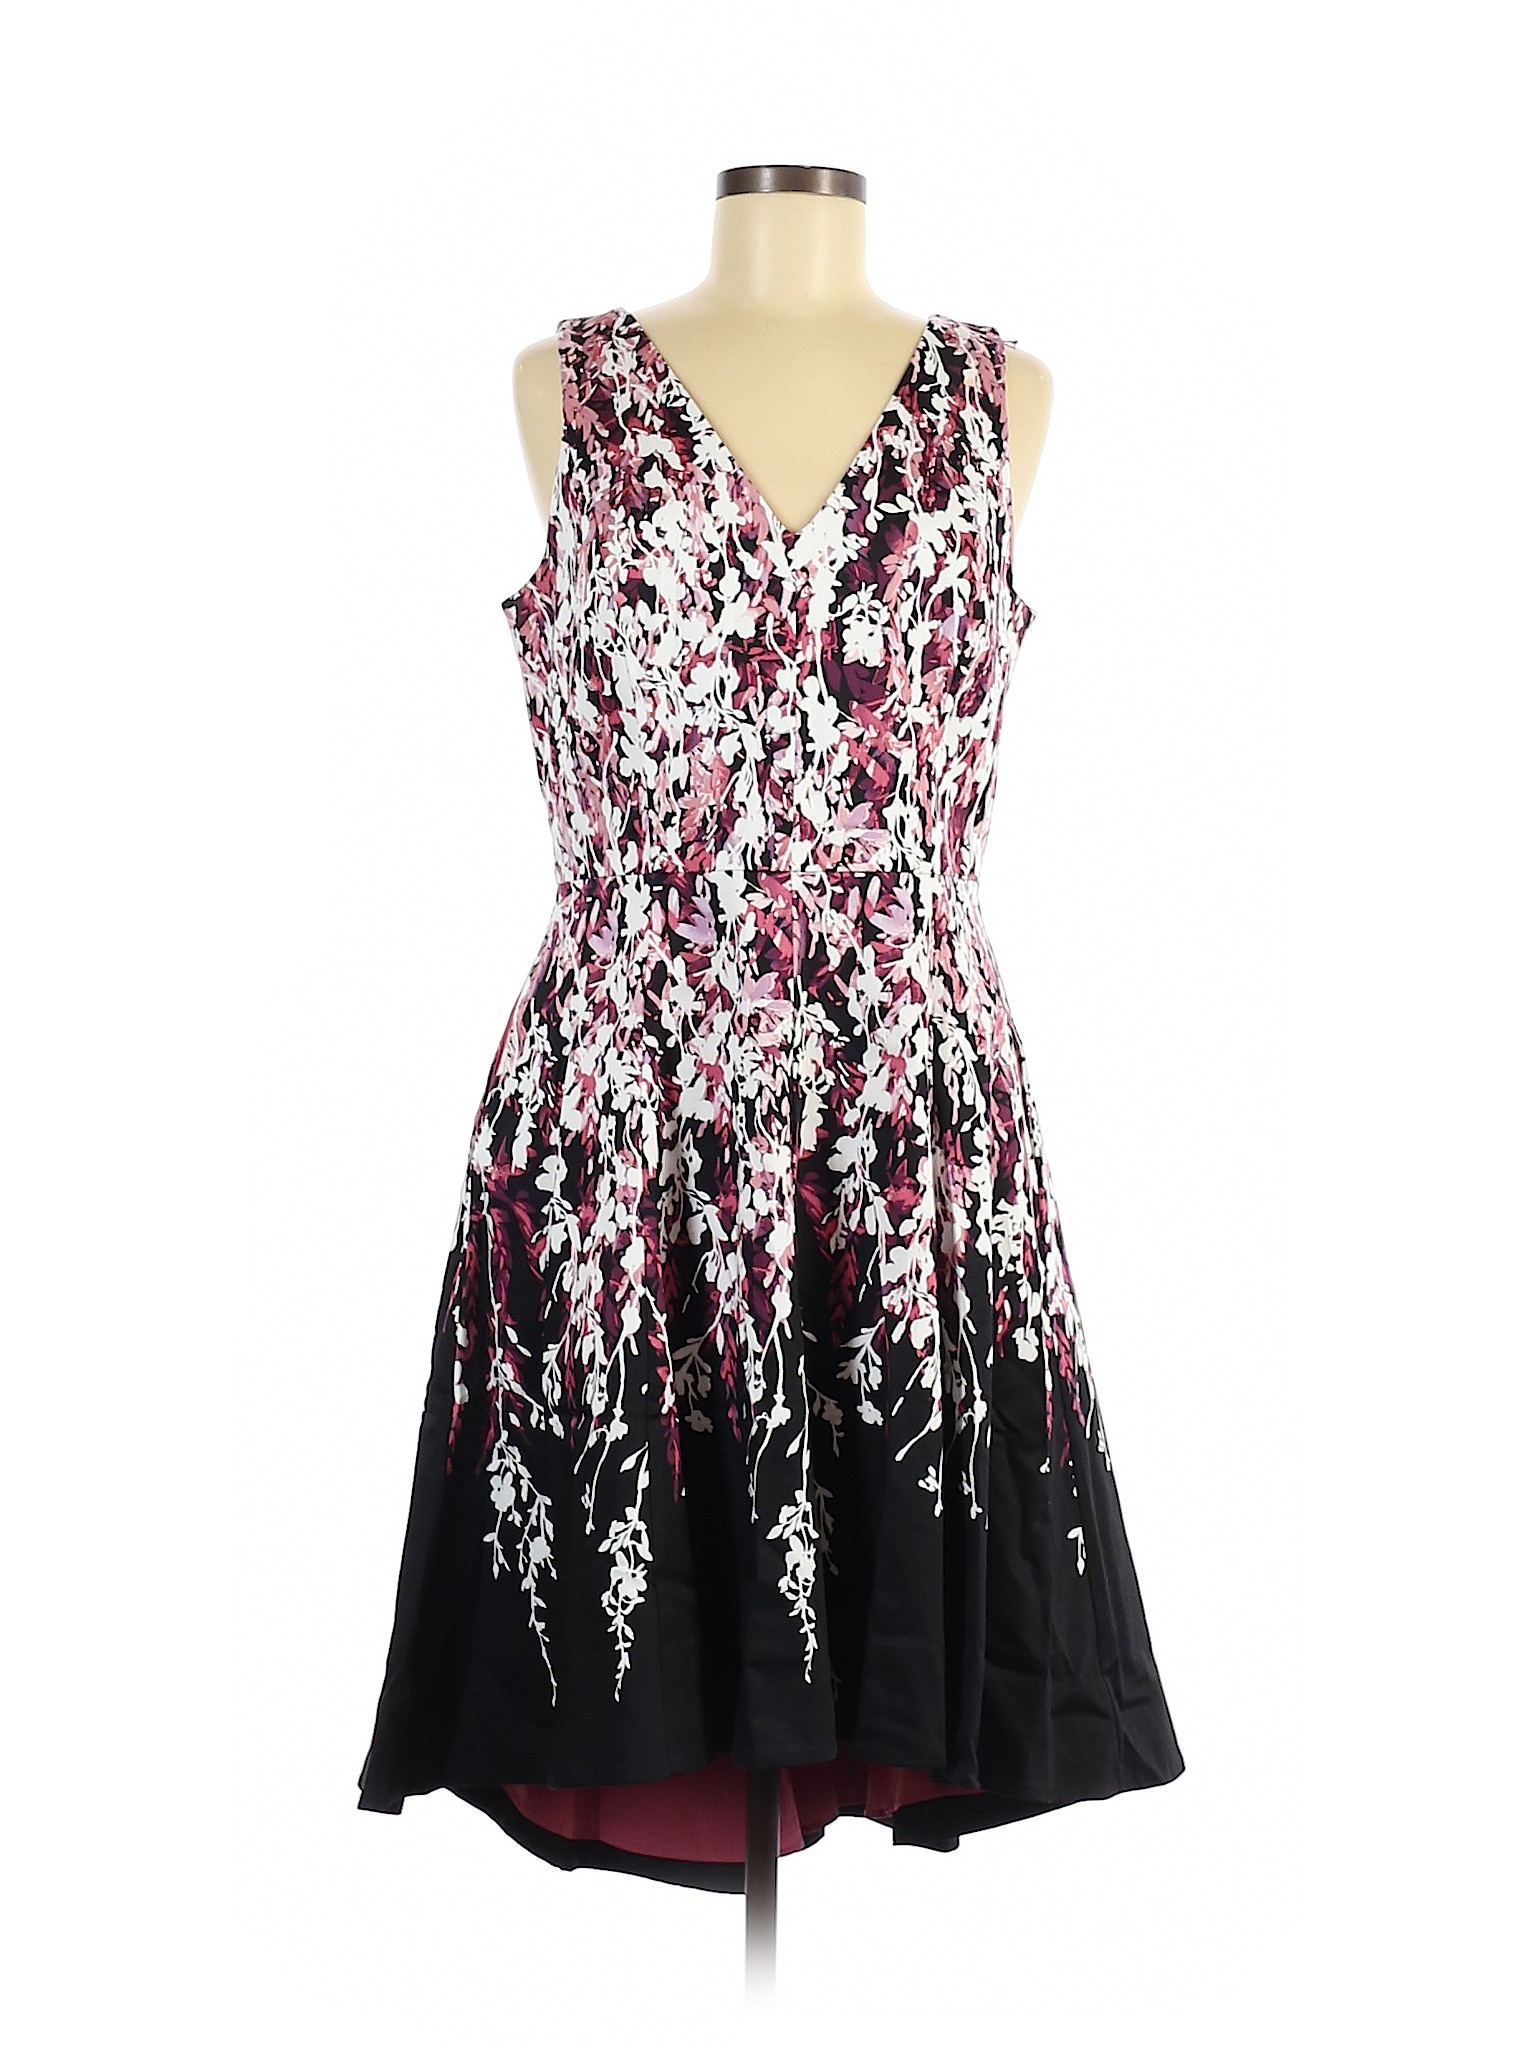 White House Black Market Floral Pink Casual Dress Size 8 - 73% off